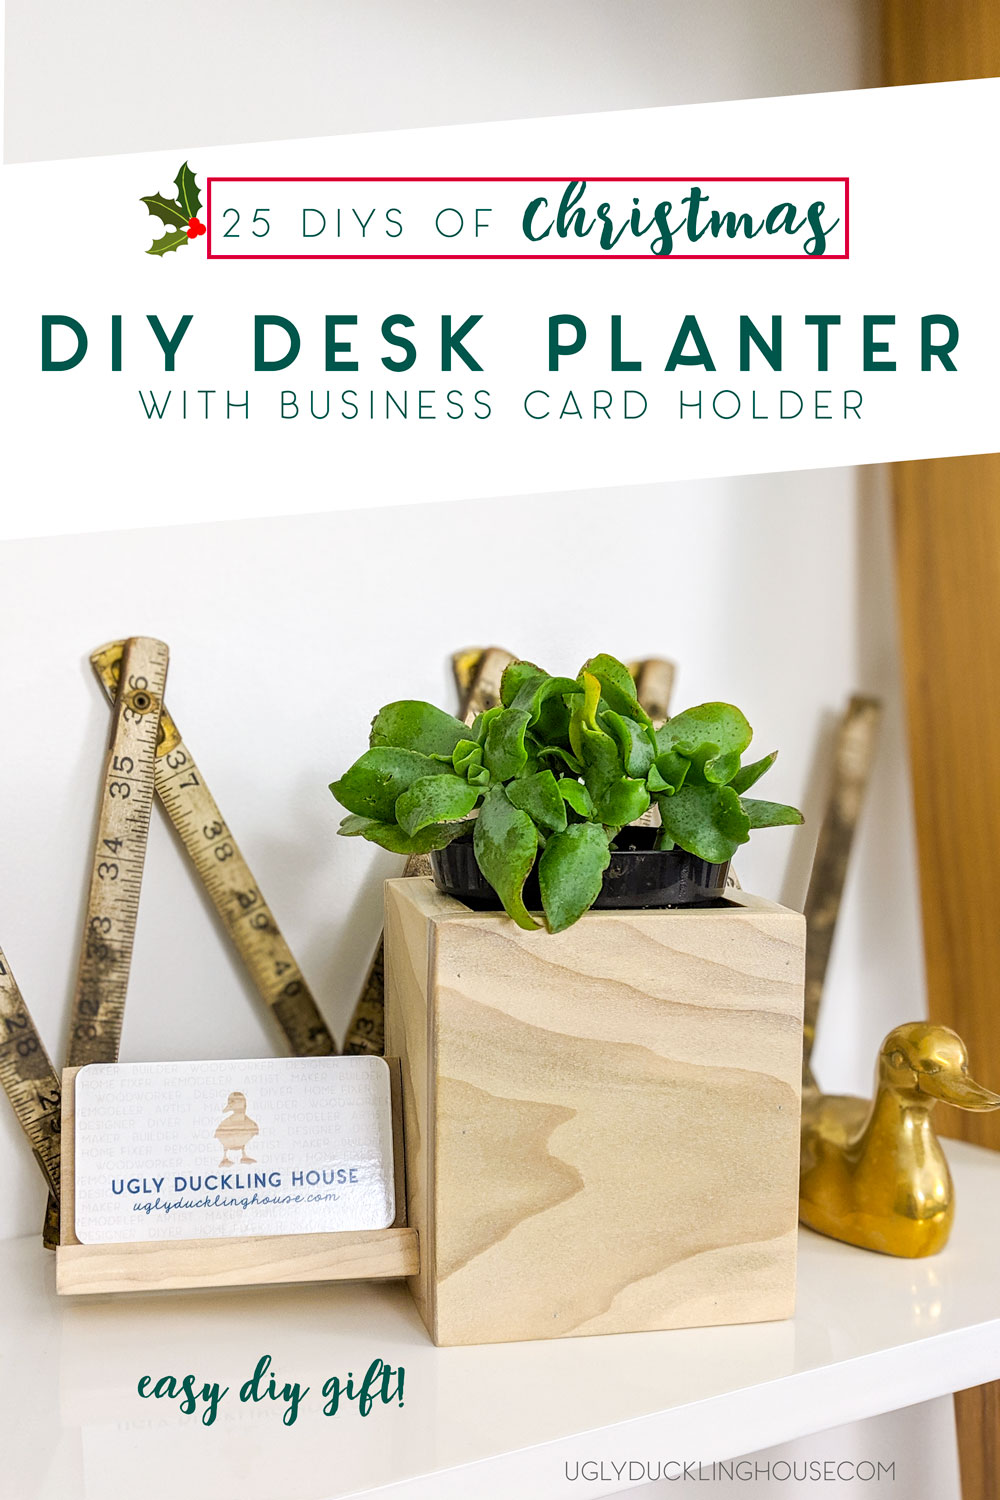 diy desk planter and business card holder - perfect last minute gift idea